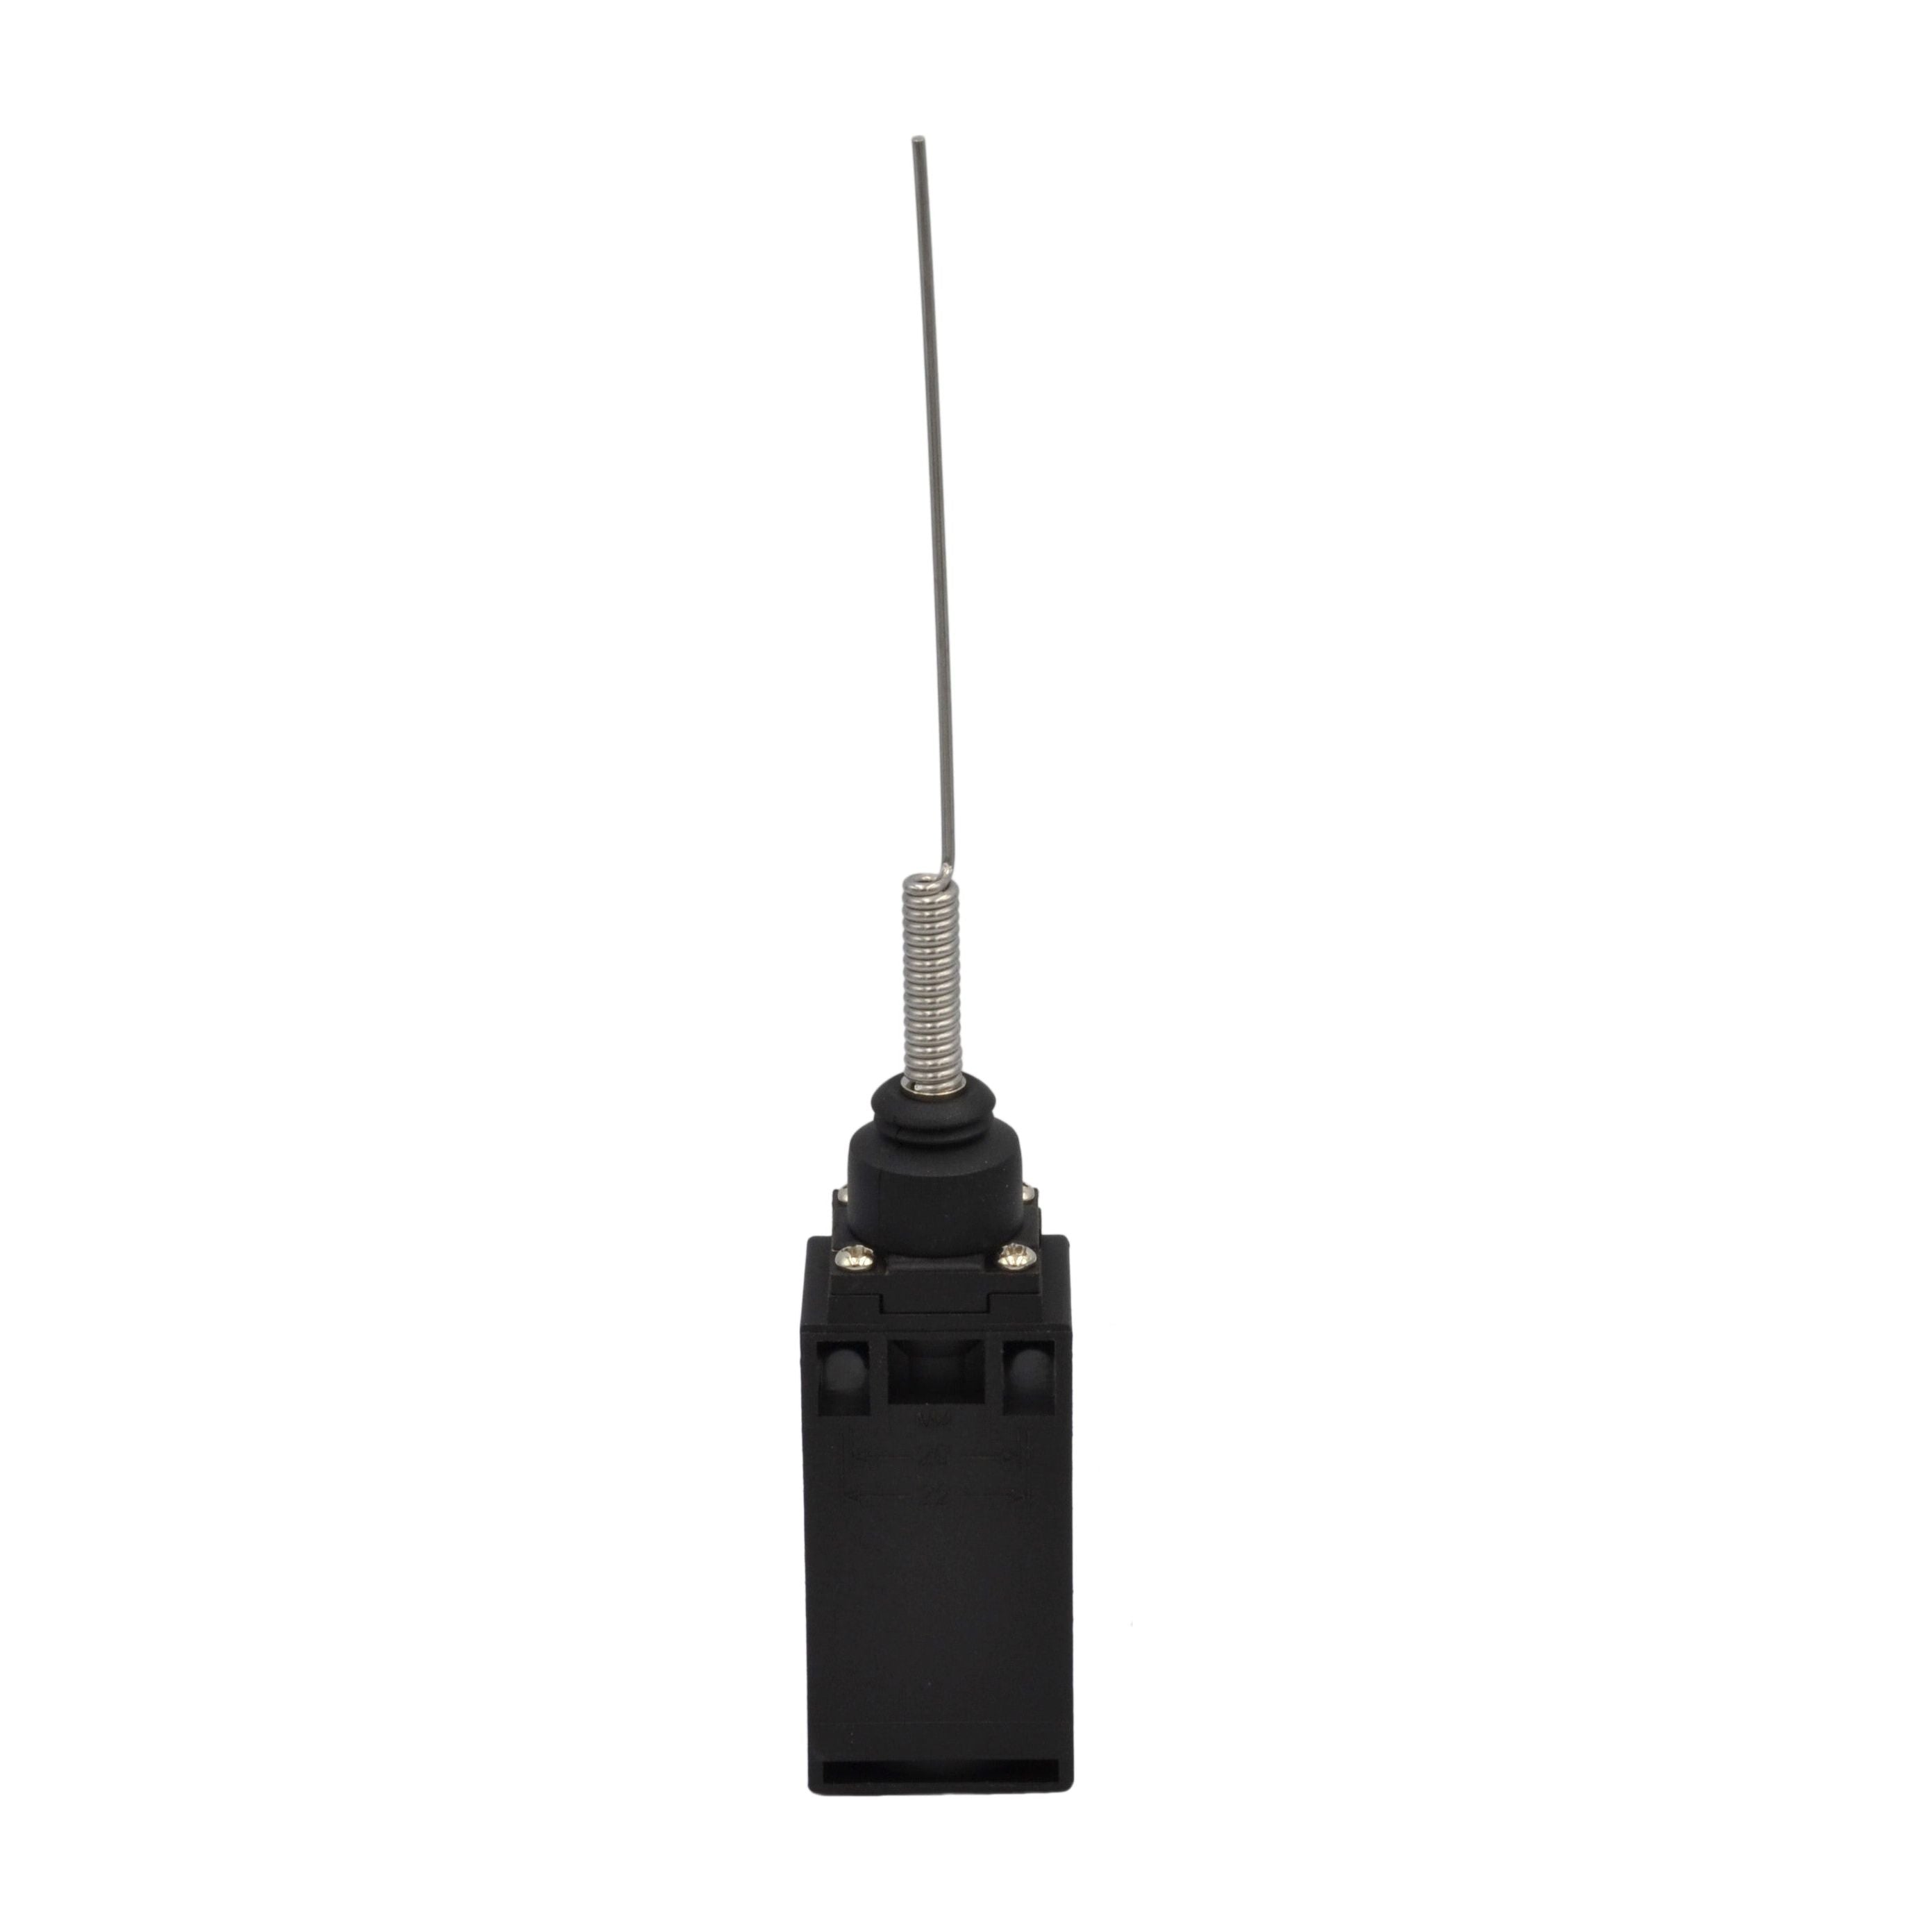 XCK-161 Spring Lever Actuator Limit Switch